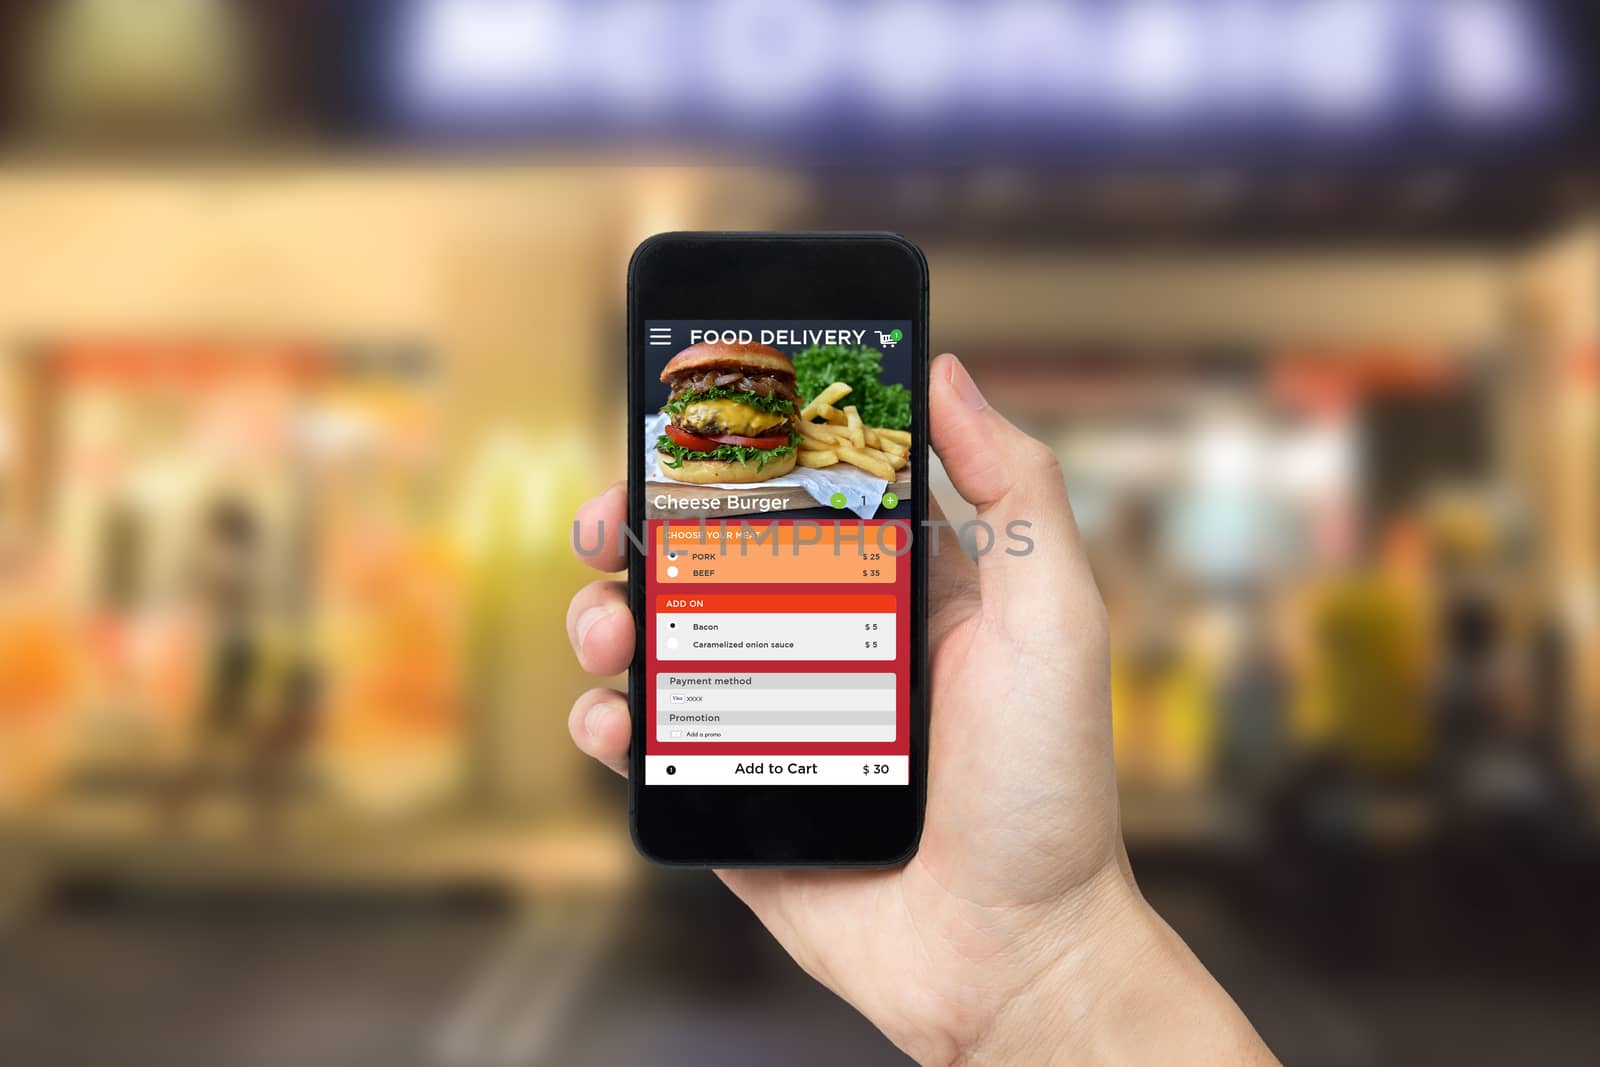 Hand holding smart phone with app food delivery order screen. application for restaurant service by barameeyay